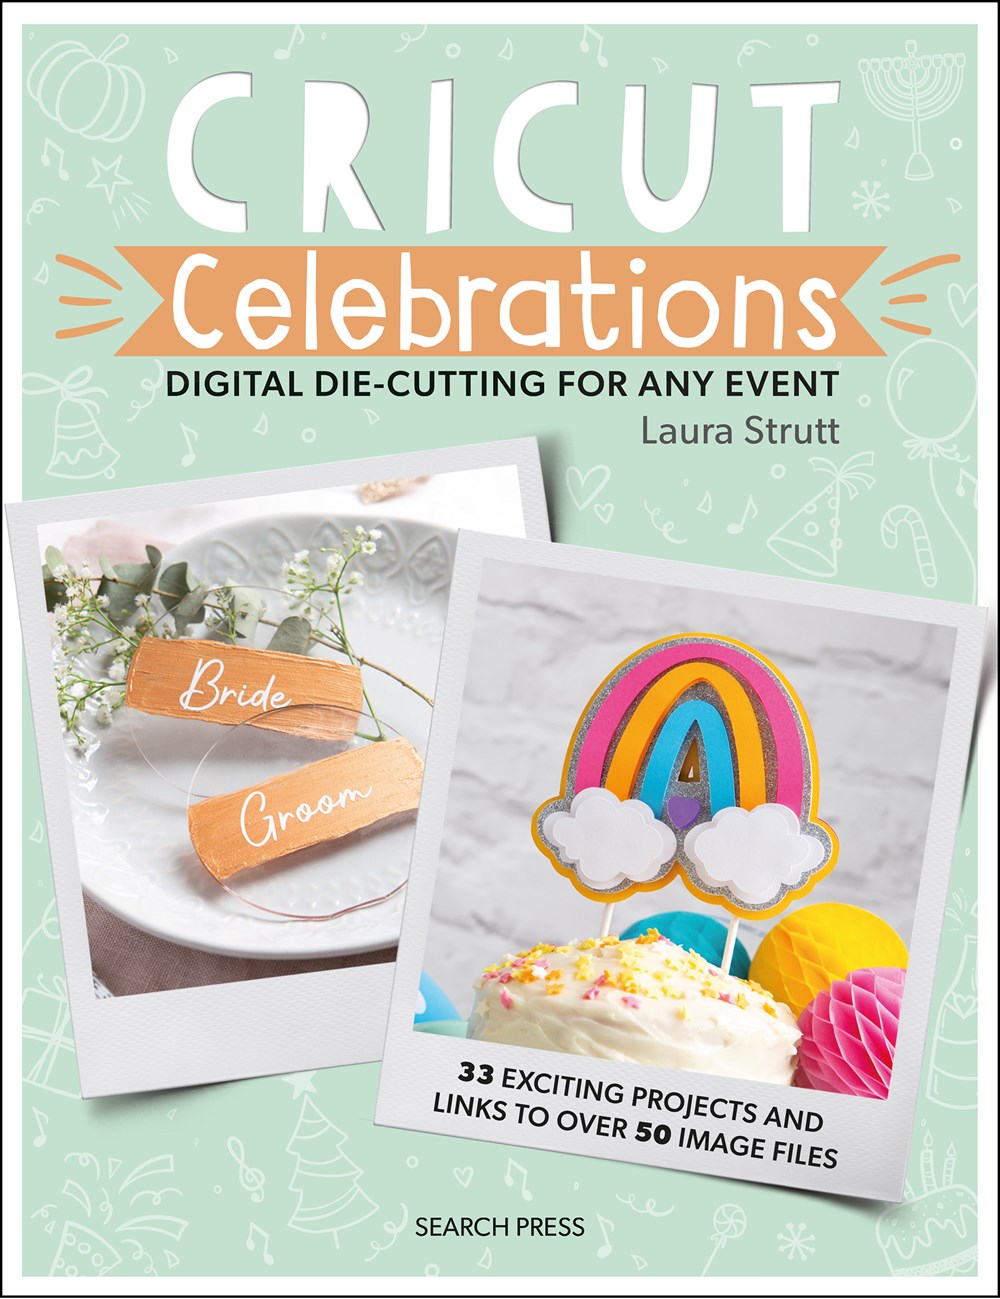 Cricut Celebrations: Digital Die-Cutting for Any Event